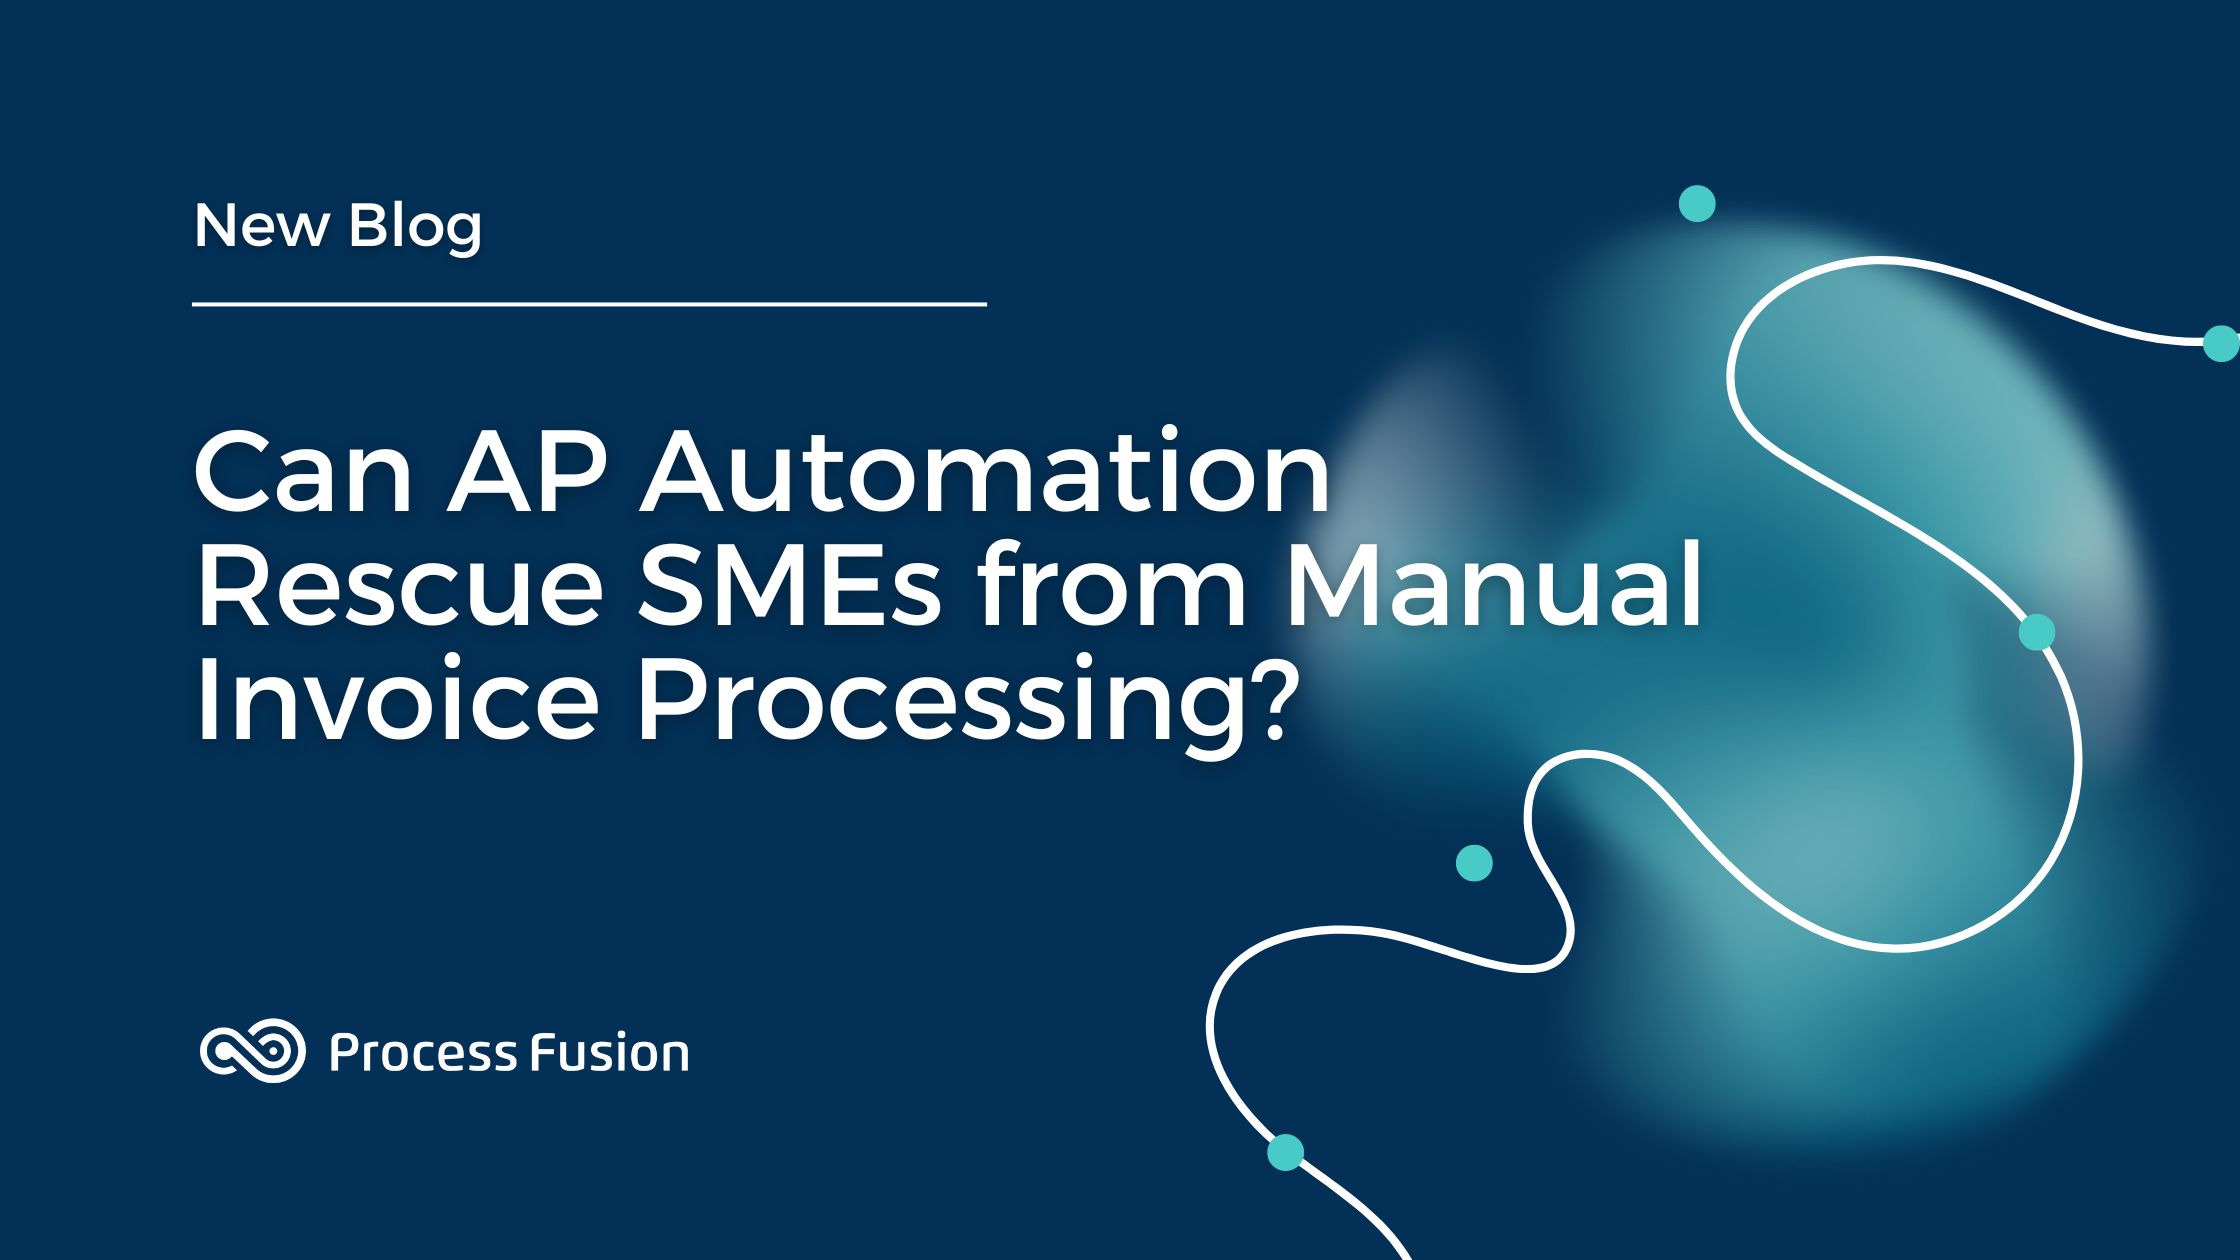 How AP Automation Can Save SMEs from Manual Invoice Processing: Benefits and Solutions